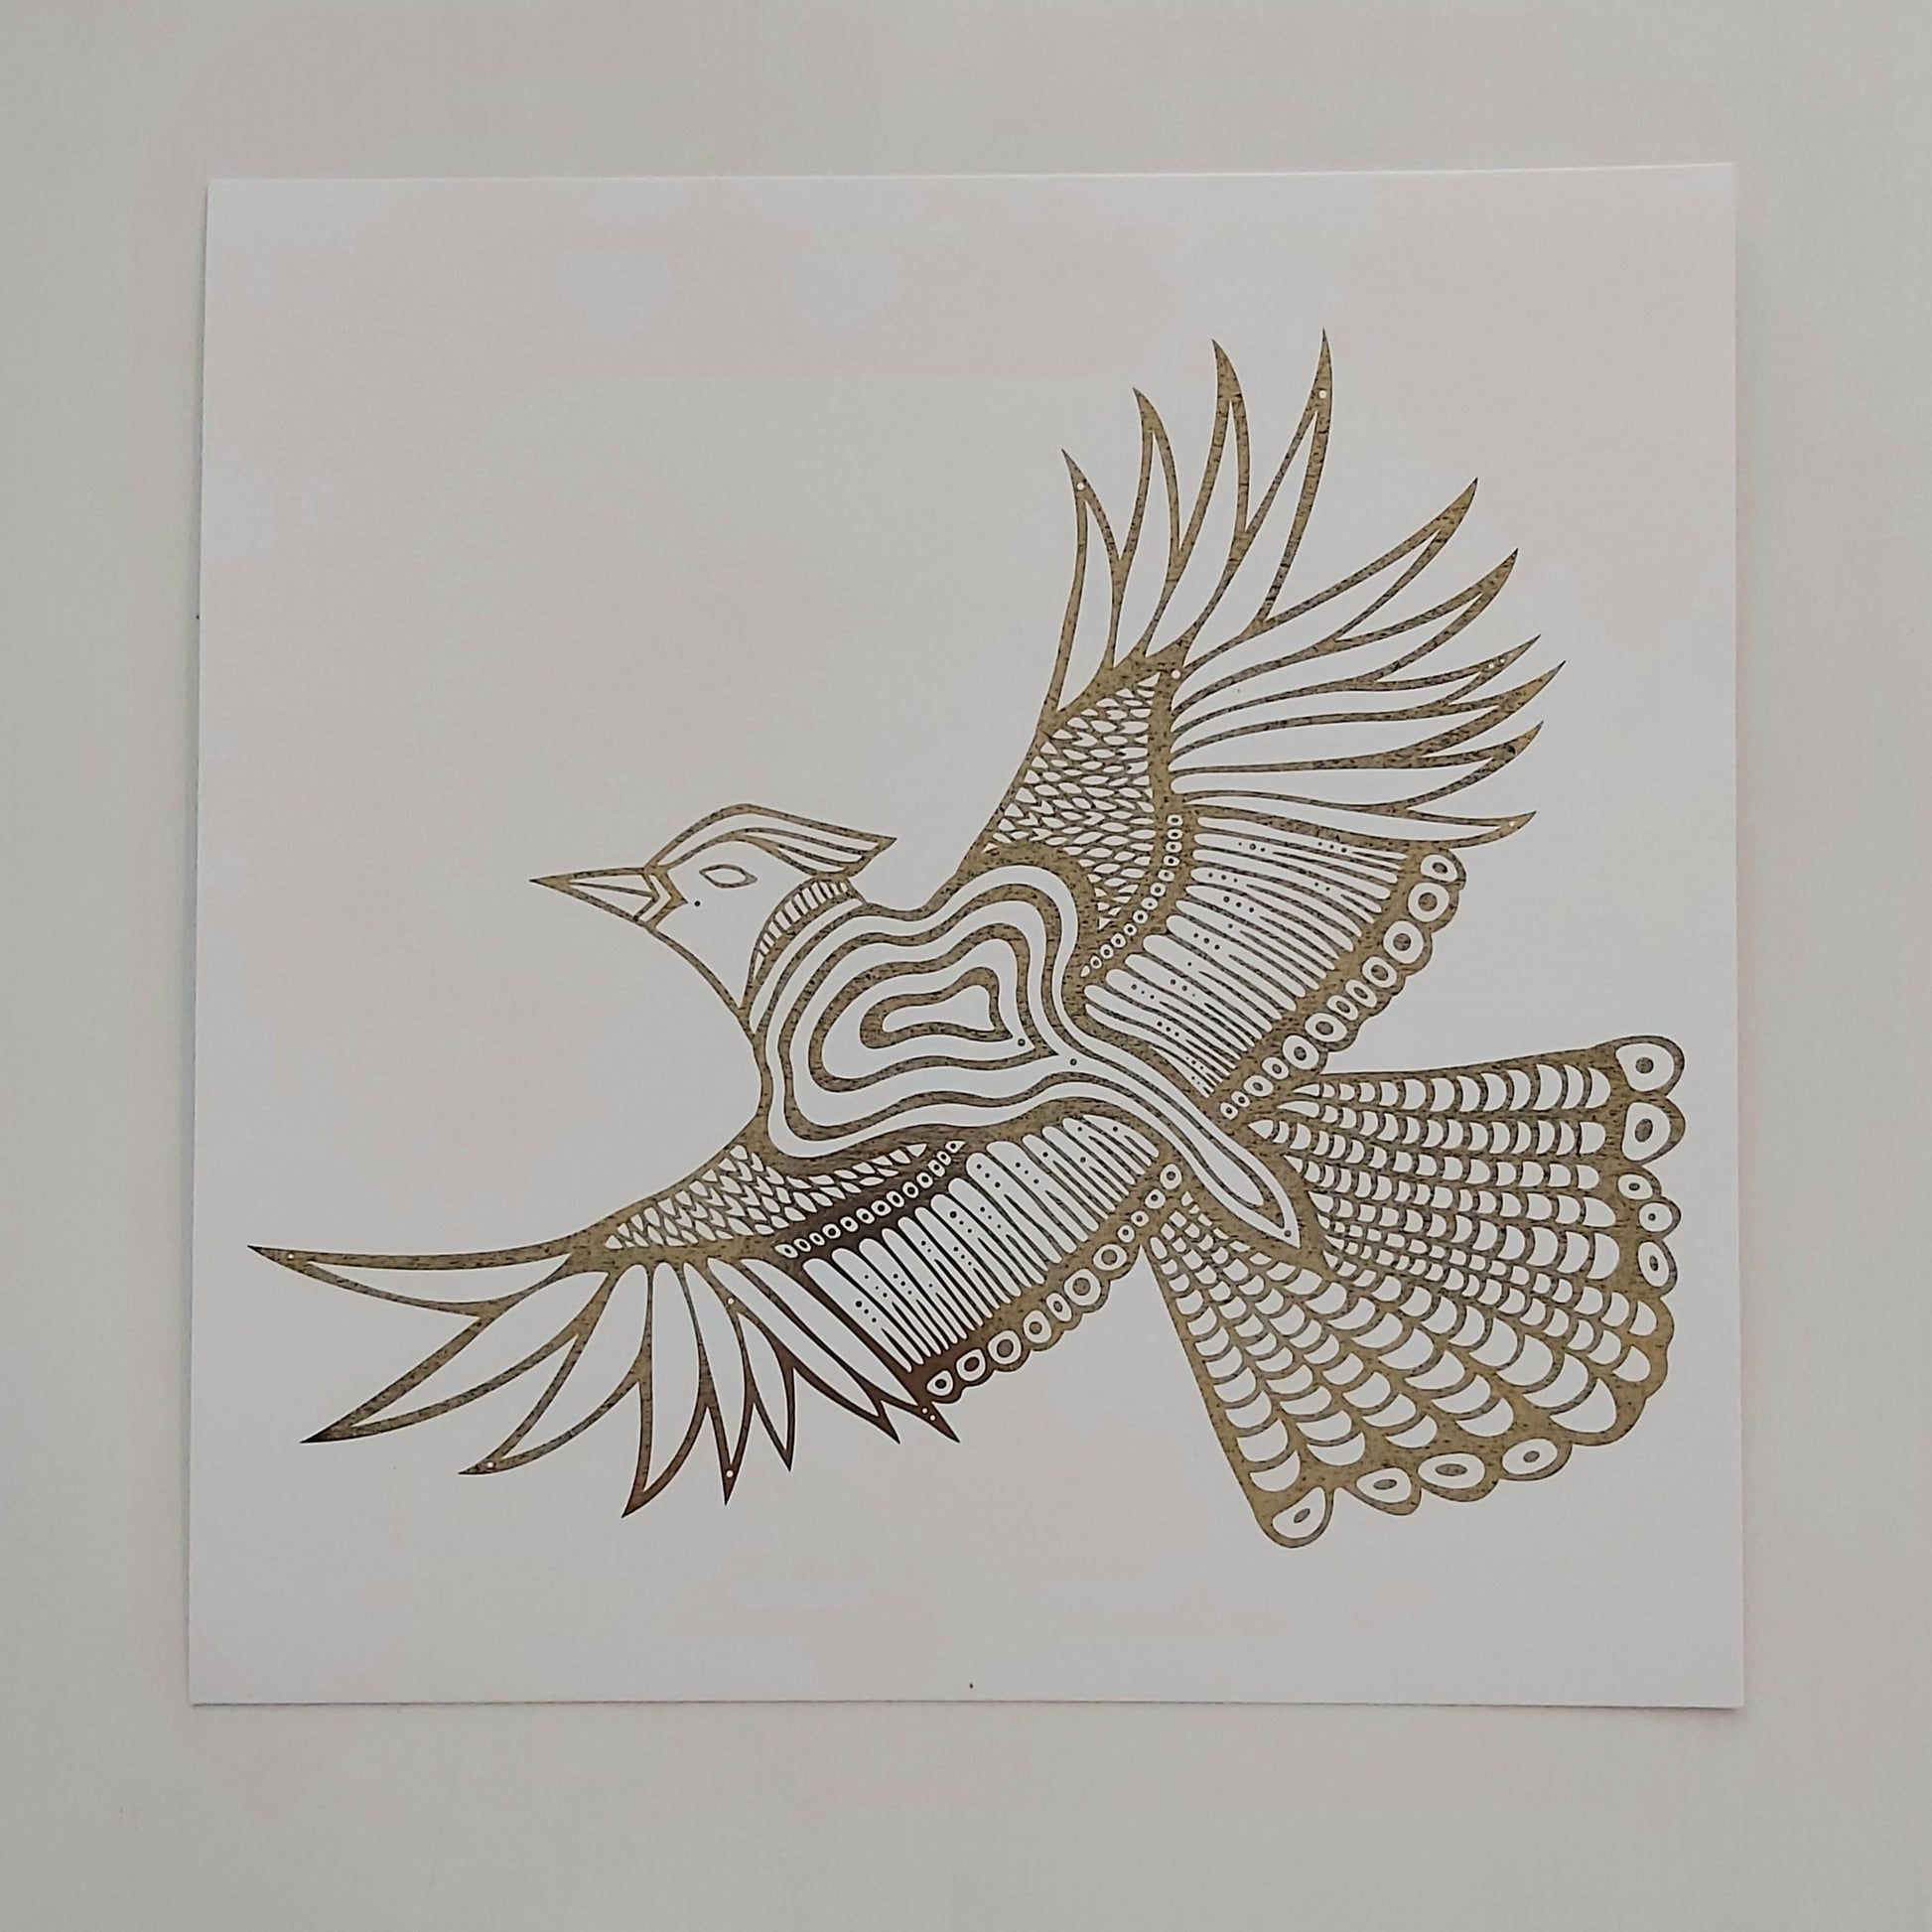 Print of Patrick Hunter's blue jay in flight in gold and white woodland art style.